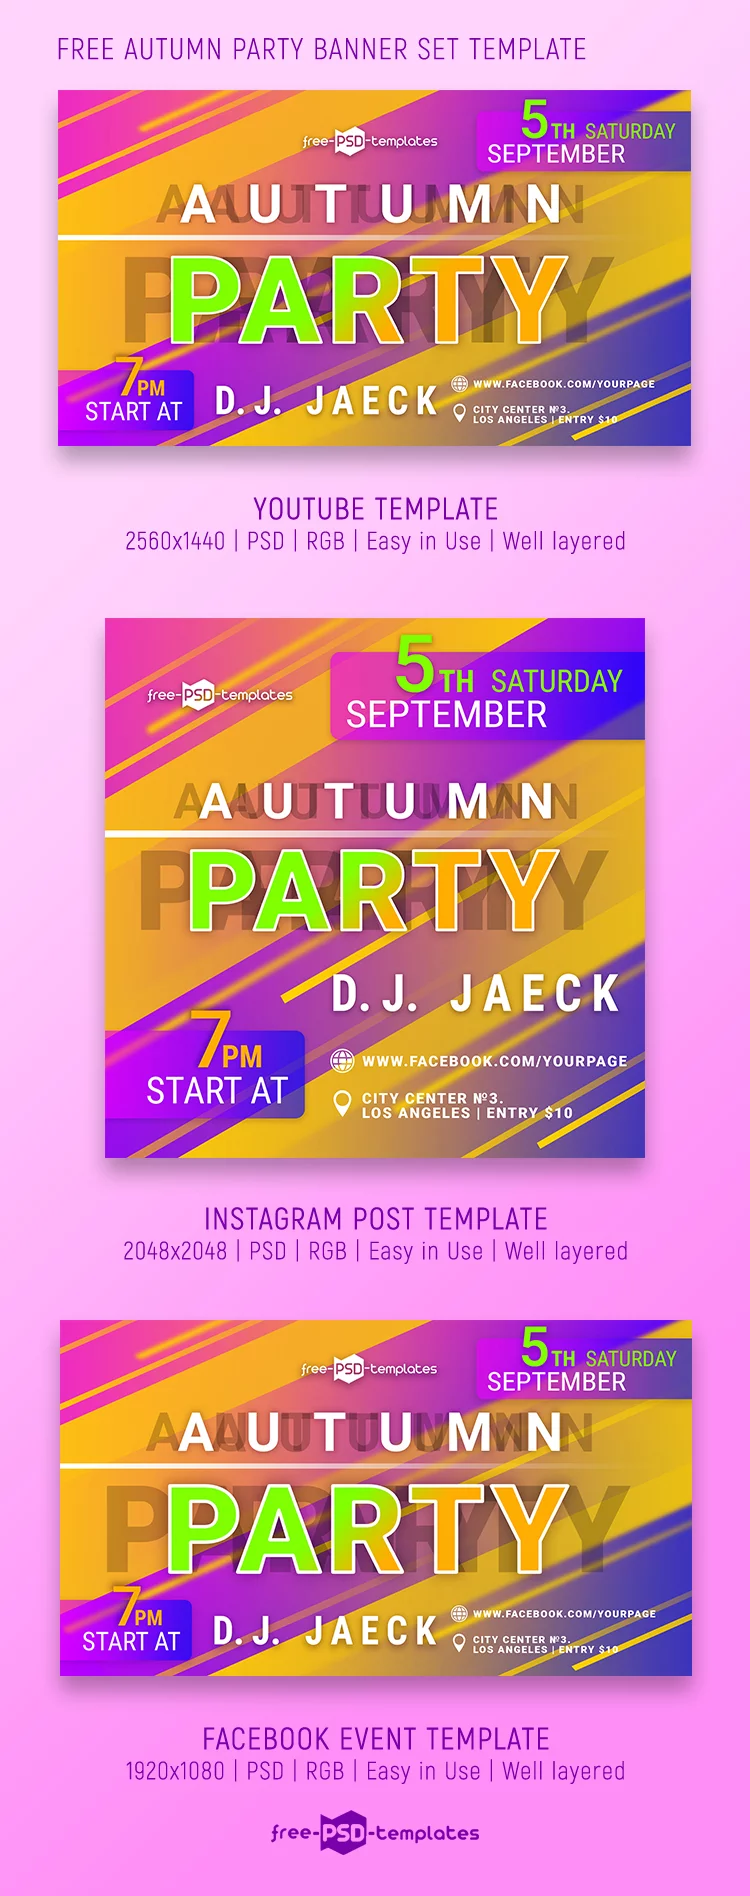 Free Autumn Party Banner Set Template